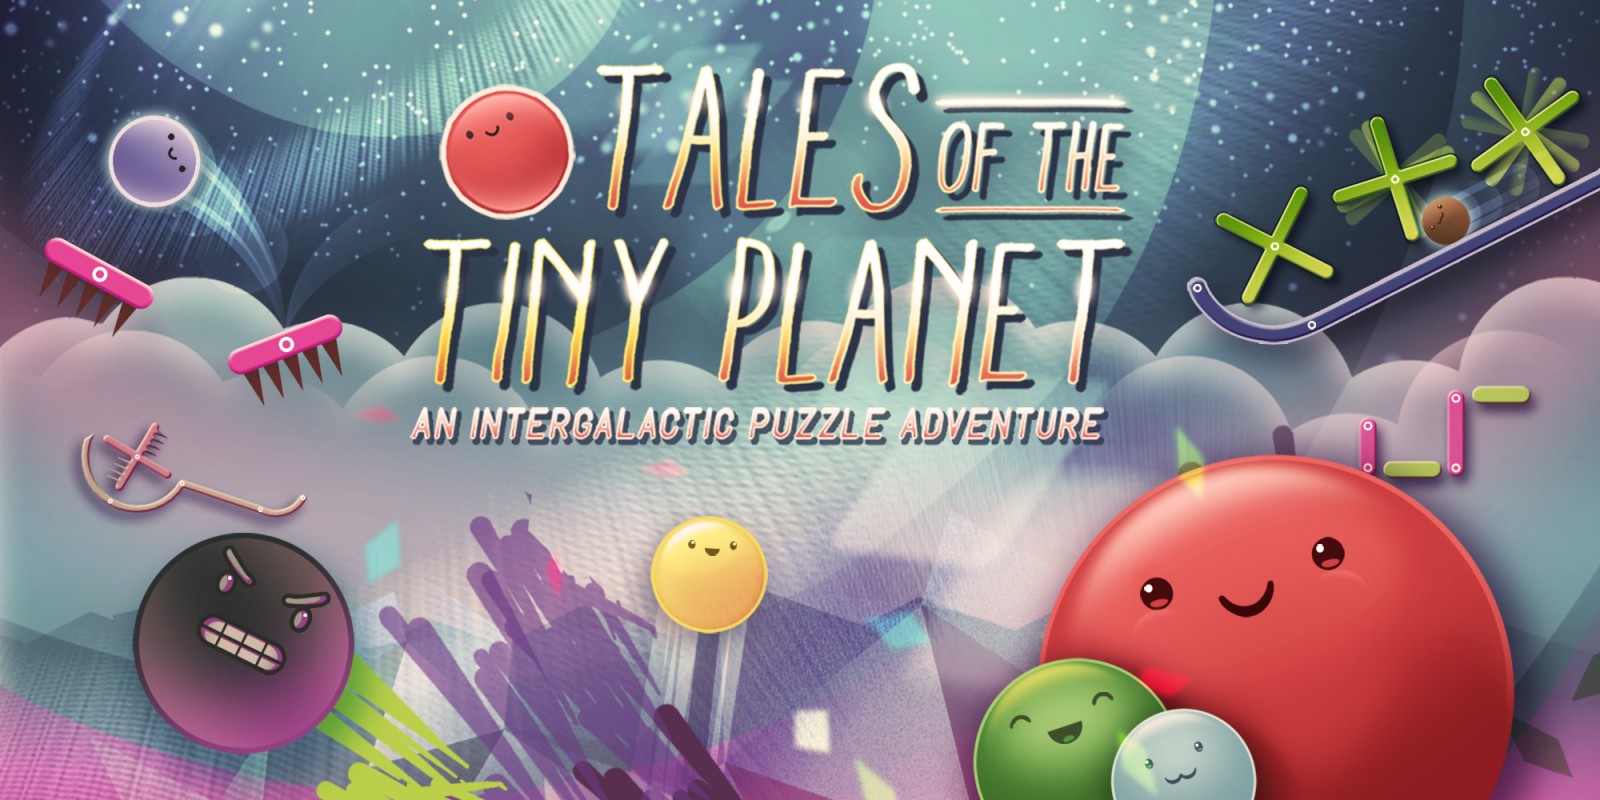 Tales of the tiny planet download free pc